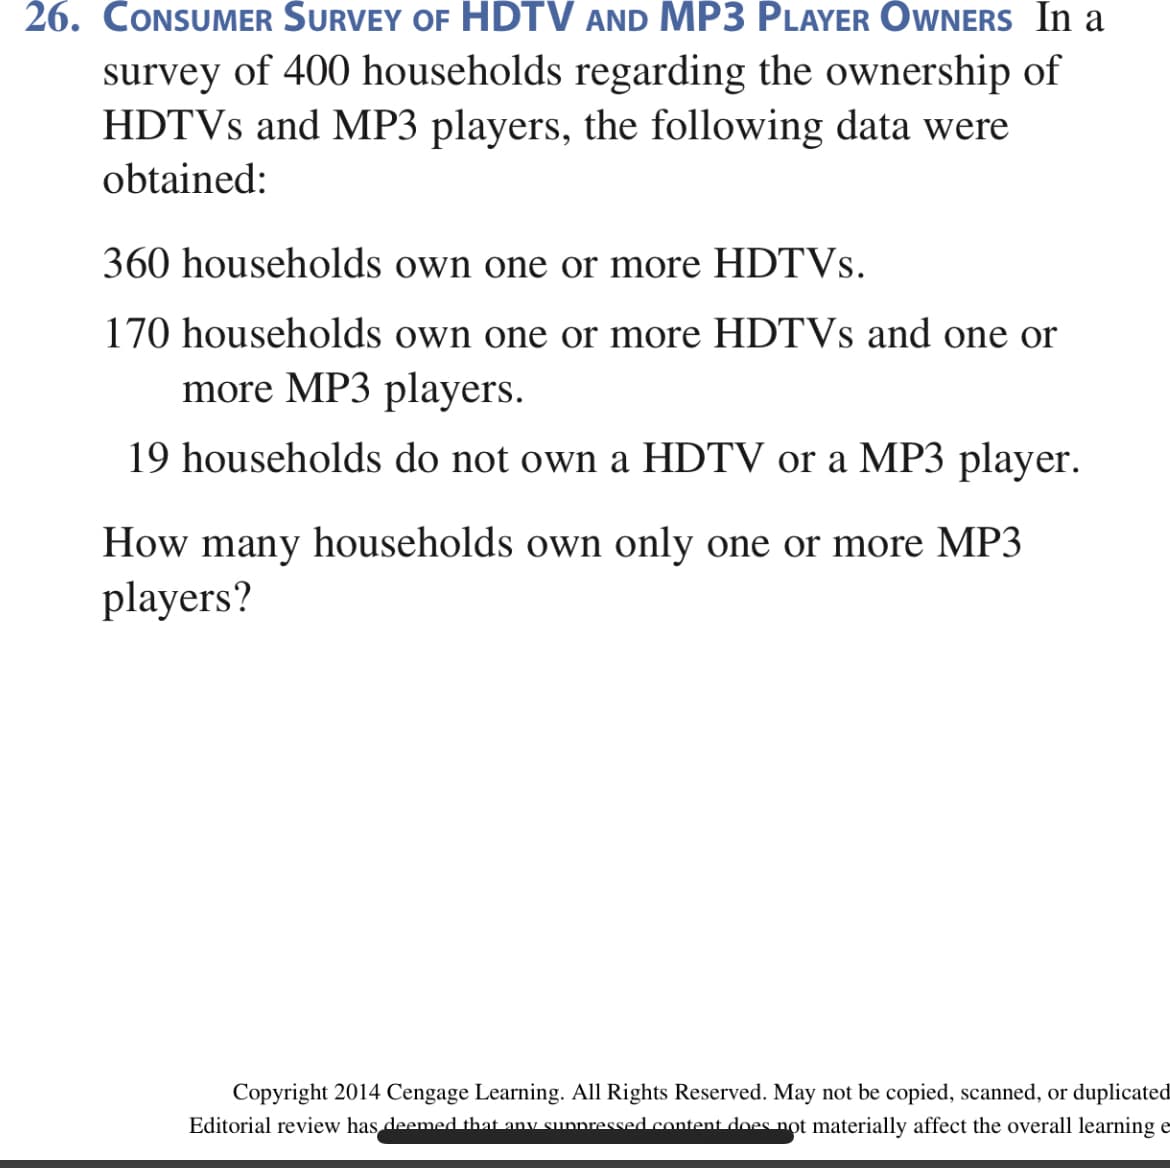 26. CONSUMER SURVEY OF HDTV AND MP3 PLAYER OWNERS In a
survey of 400 households regarding the ownership of
HDTVS and MP3 players, the following data were
obtained:
360 households own one or more HDTVS.
170 households own one or more HDTVS and one or
more MP3 players.
19 households do not own a HDTV or a MP3 player.
How many households own only one or more MP3
players?
Copyright 2014 Cengage Learning. All Rights Reserved. May not be copied, scanned, or duplicated
Editorial review has deemed that any sunnressed content does not materially affect the overall learning e
